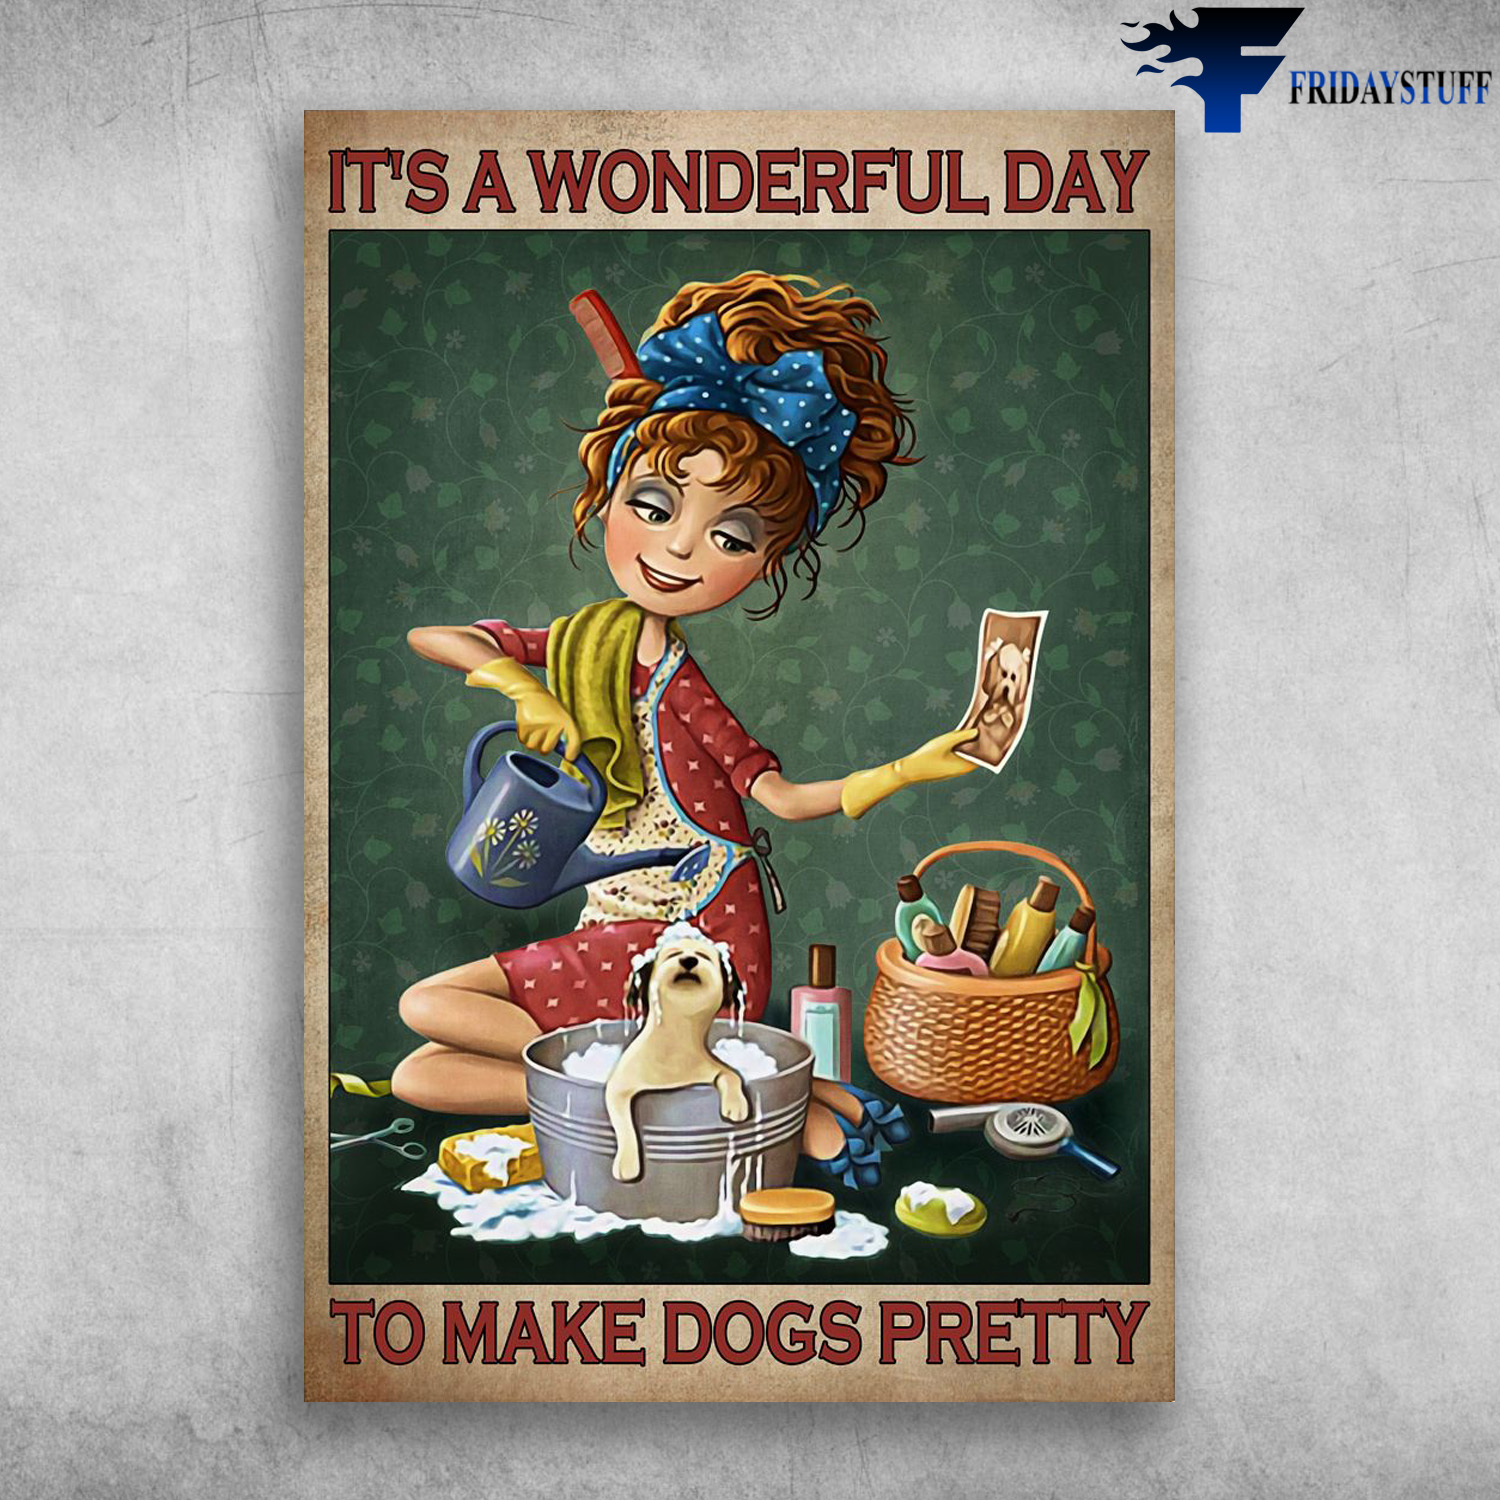 Girl Loves Dog - It's A Wonderful Day, To Make Dogs Pretty, girl bathing the dog